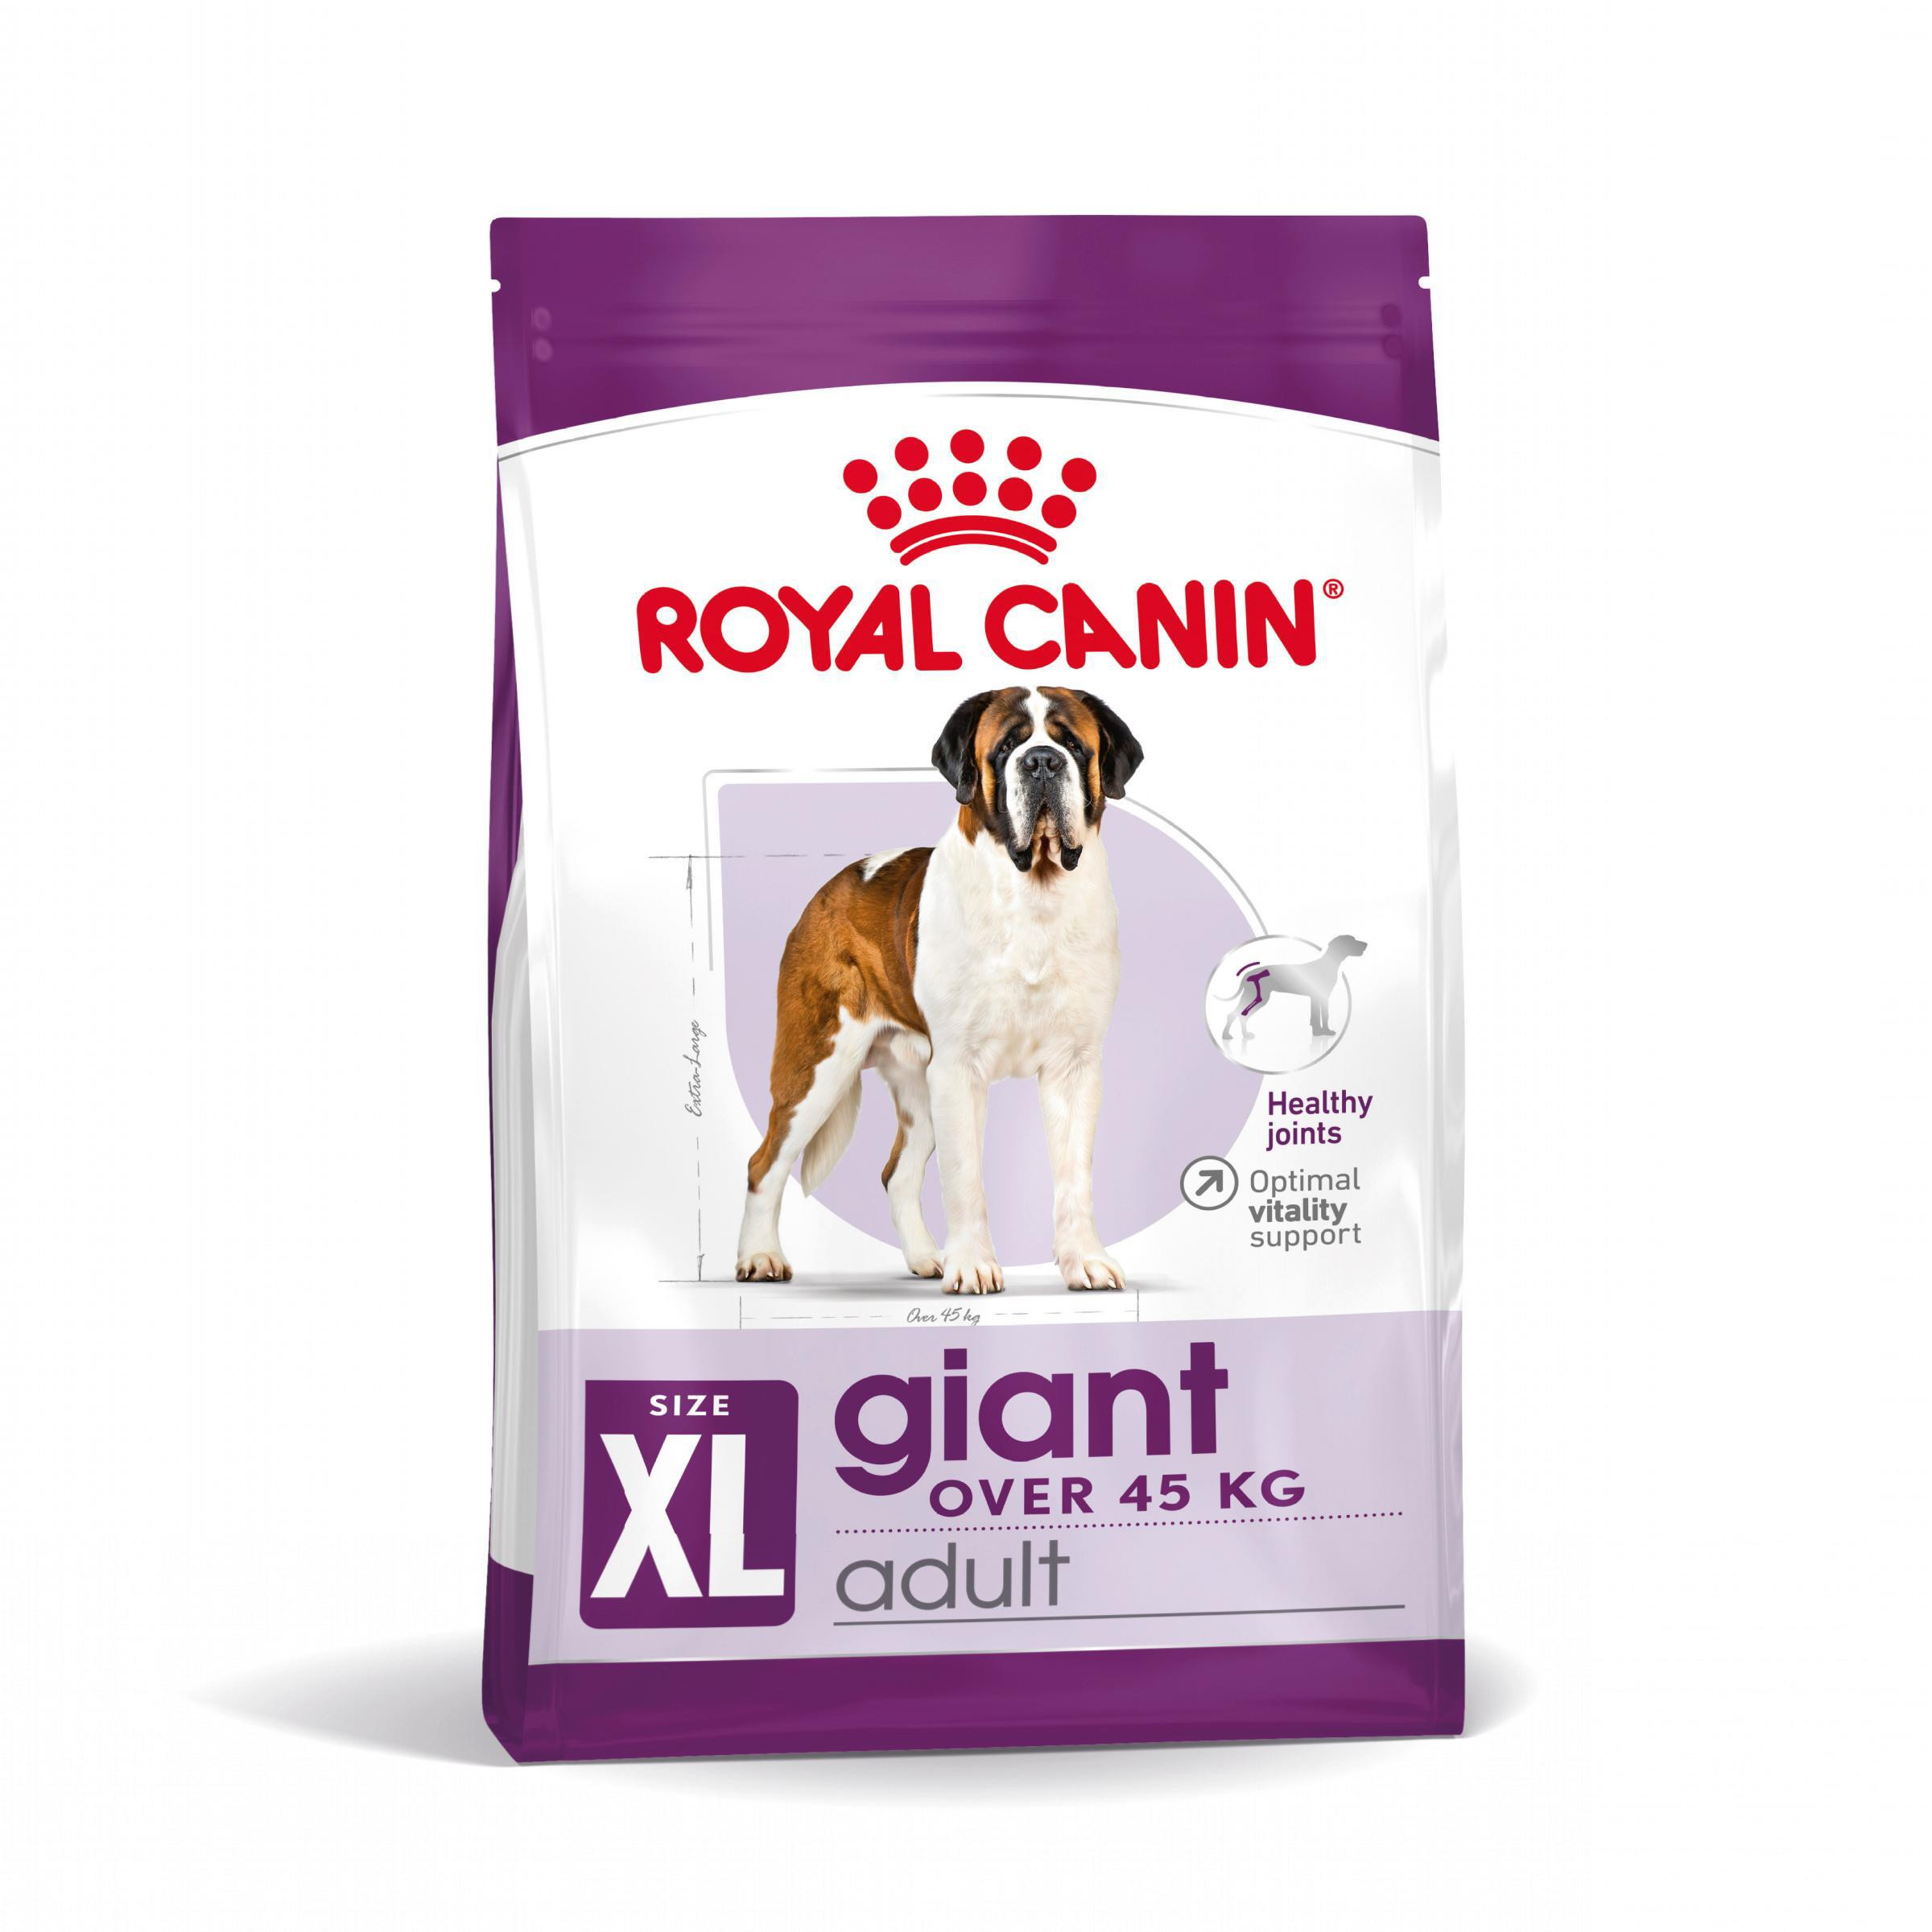 Royal Canin Giant Adult pour chien